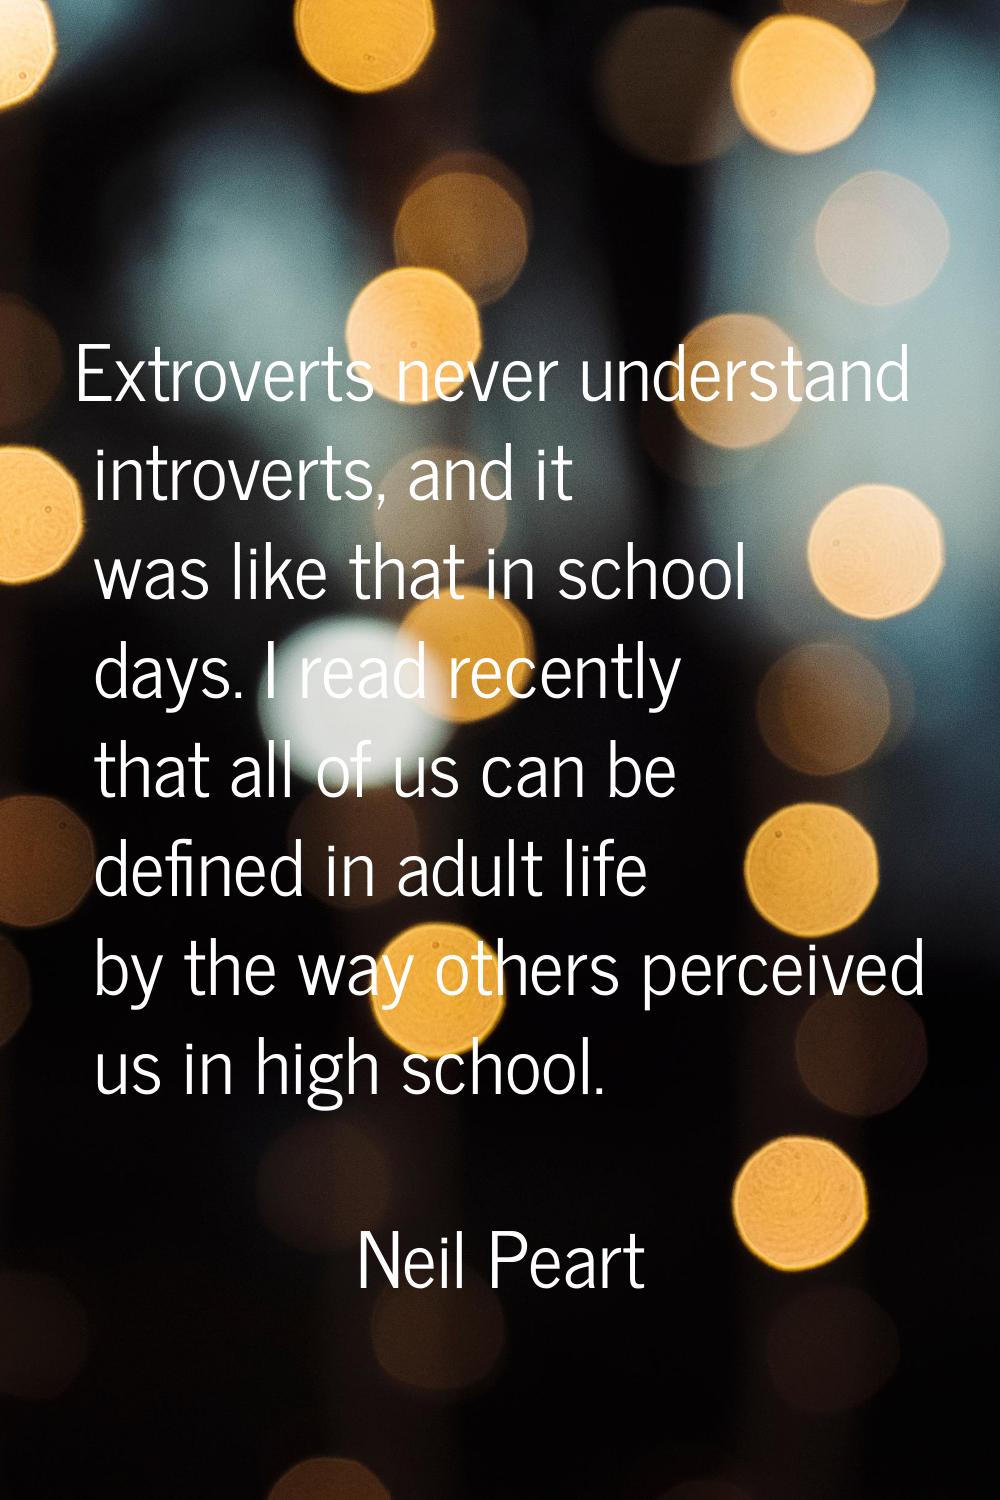 Extroverts never understand introverts, and it was like that in school days. I read recently that a